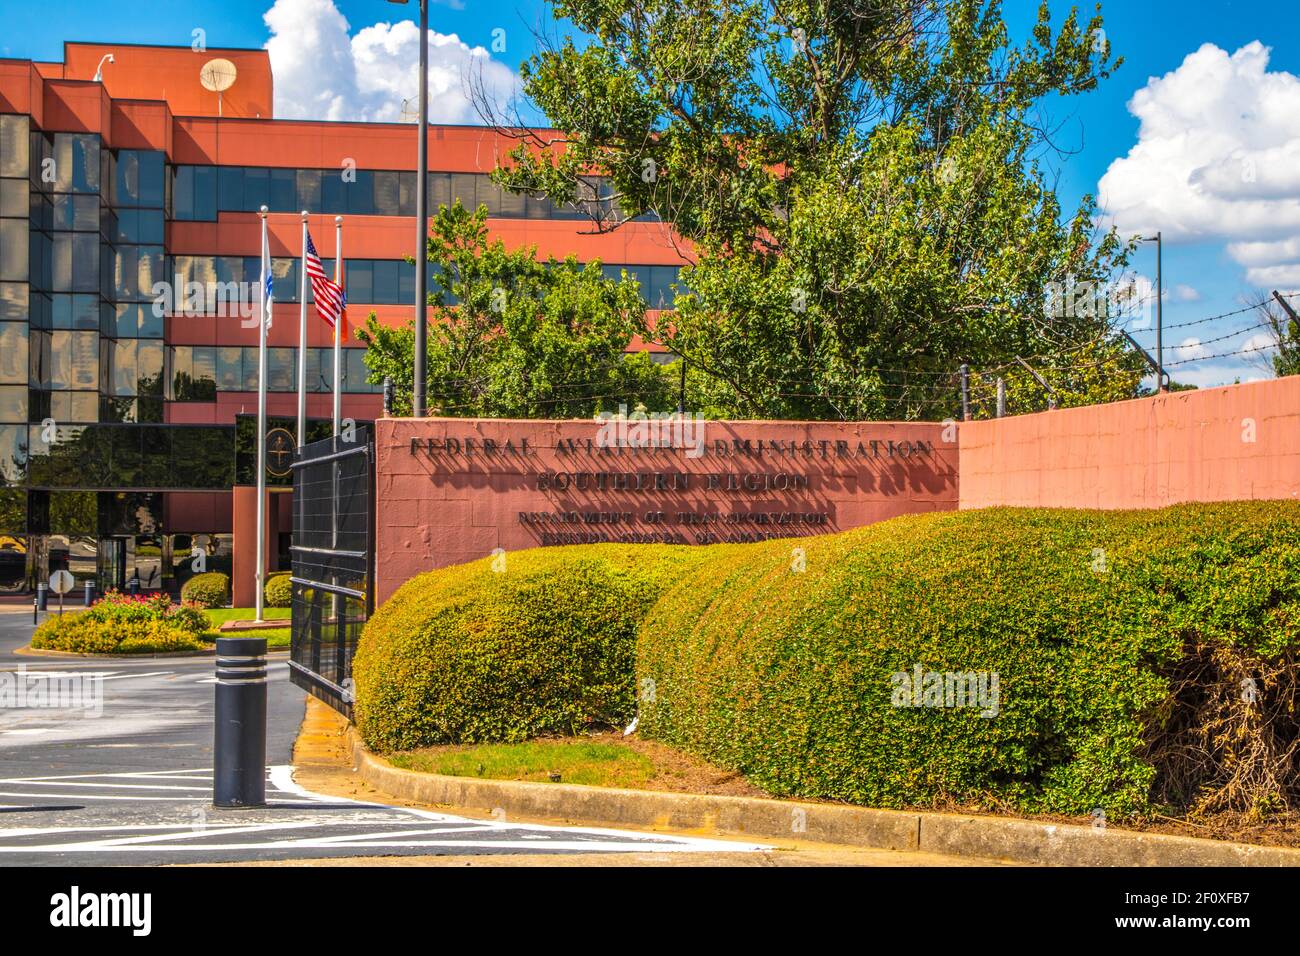 College Park, Ga / USA - 07 23 20: Federal Aviation Administration building entrance sign Stock Photo